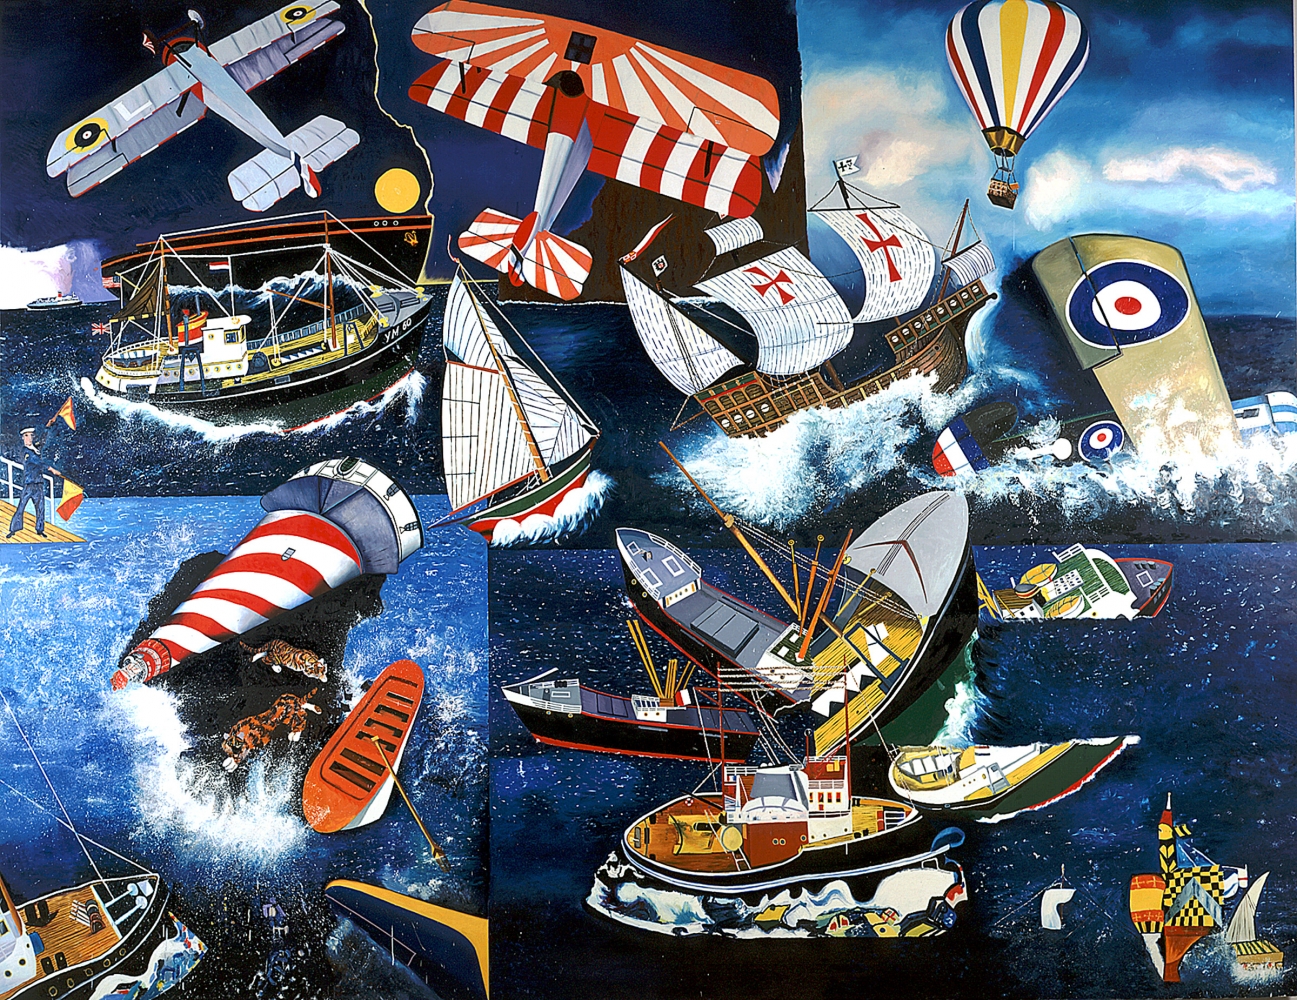 painting of collaged imagery of the sea, including ships, boats, biplanes and a lighthouse